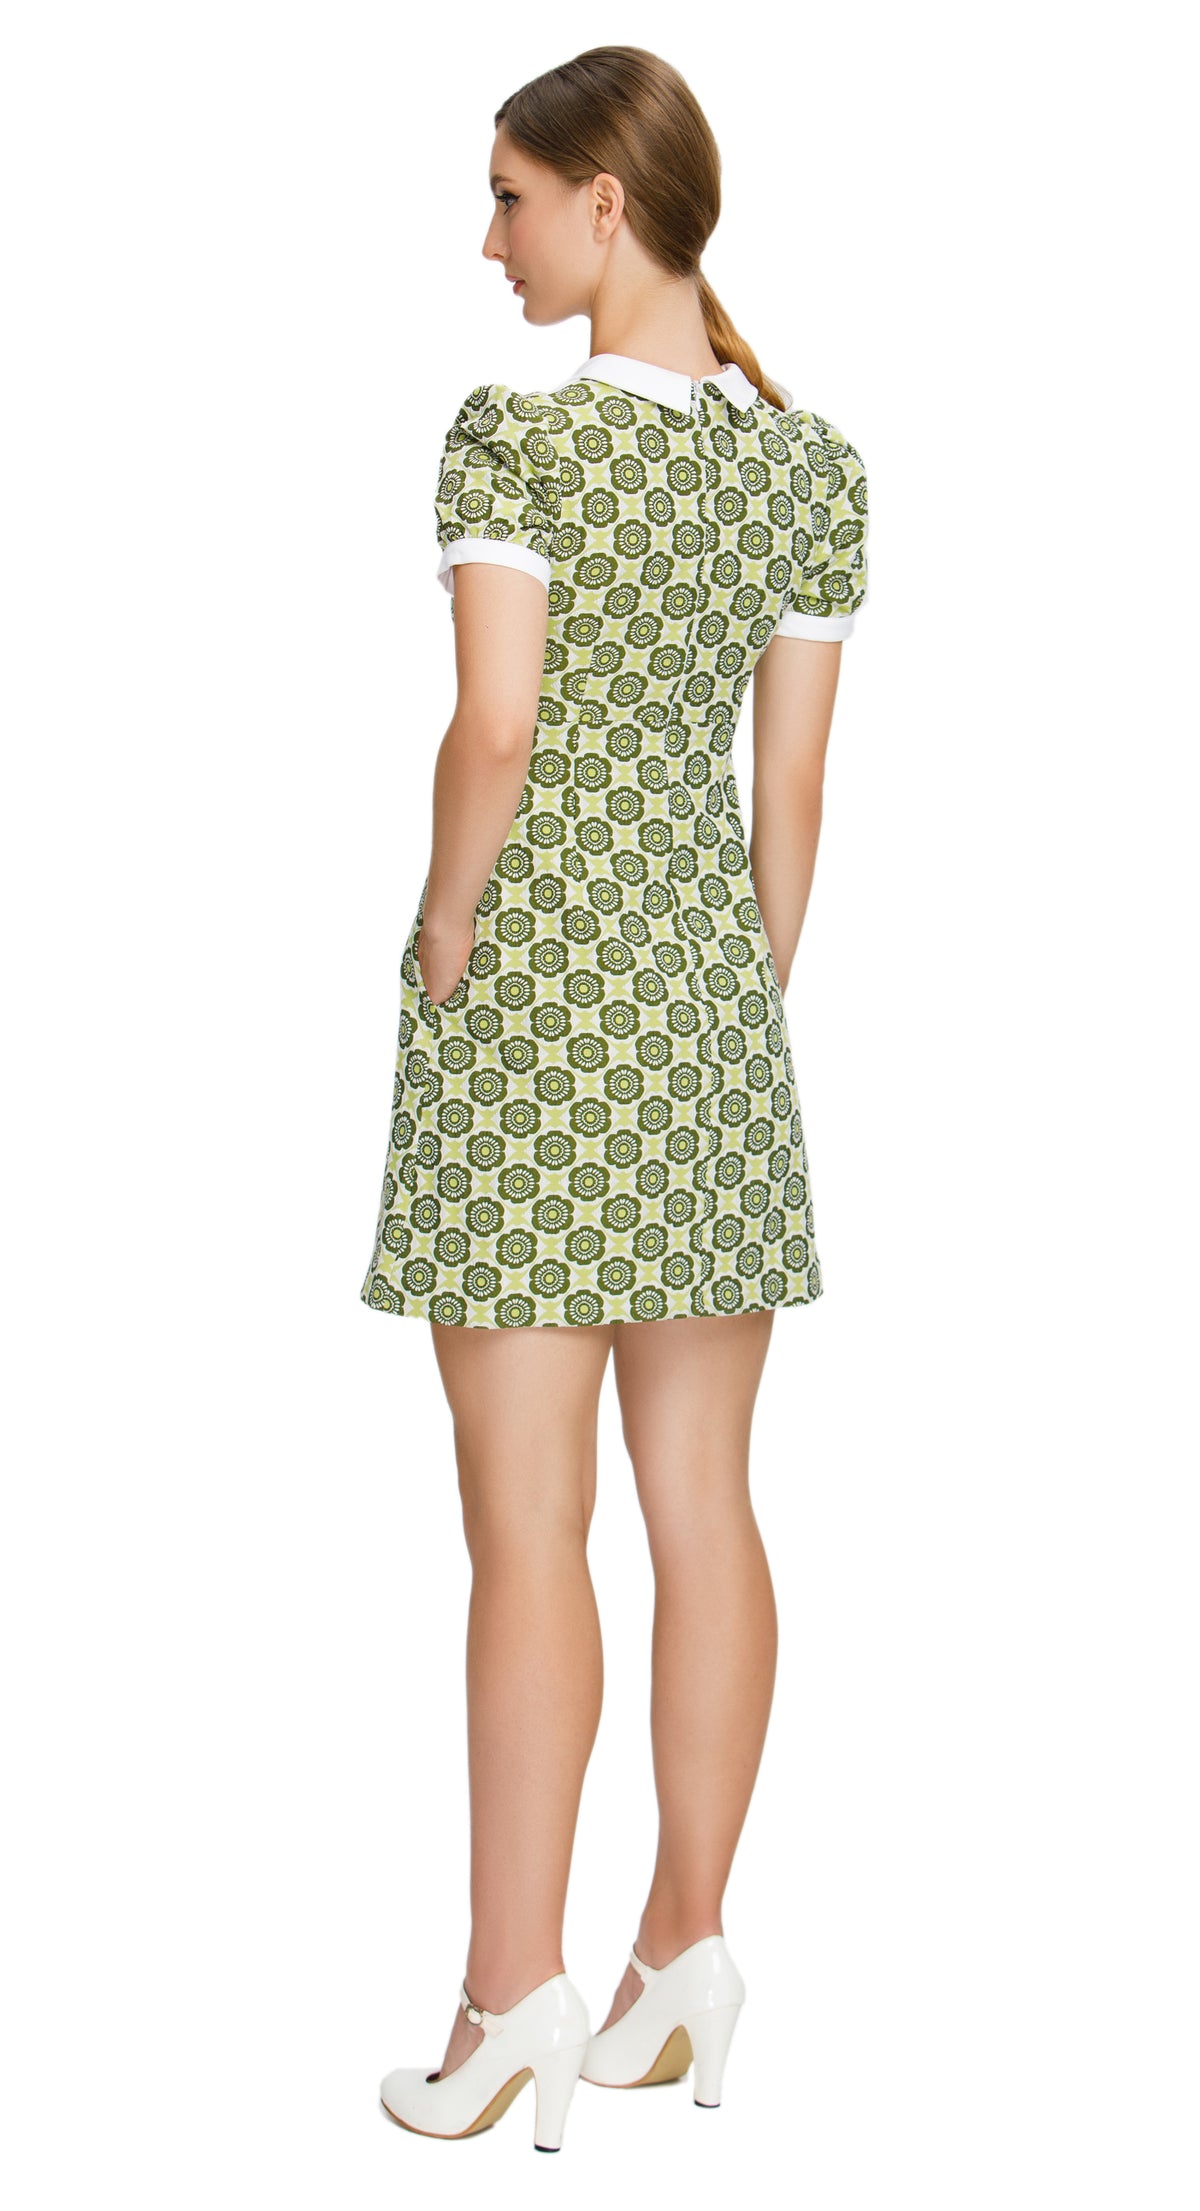 Fitted sixties style, shades of green floral,  a-line dress; a versatile piece suitable for both work and play. This dress features a charming floral pattern in various shades of green, exuding a delightful retro vibe. The style features a white bib offset by a 4-button-detailed tab, slightly puffed short sleeves, and functional side pockets, adding a touch of timeless elegance and practicality to the ensemble.